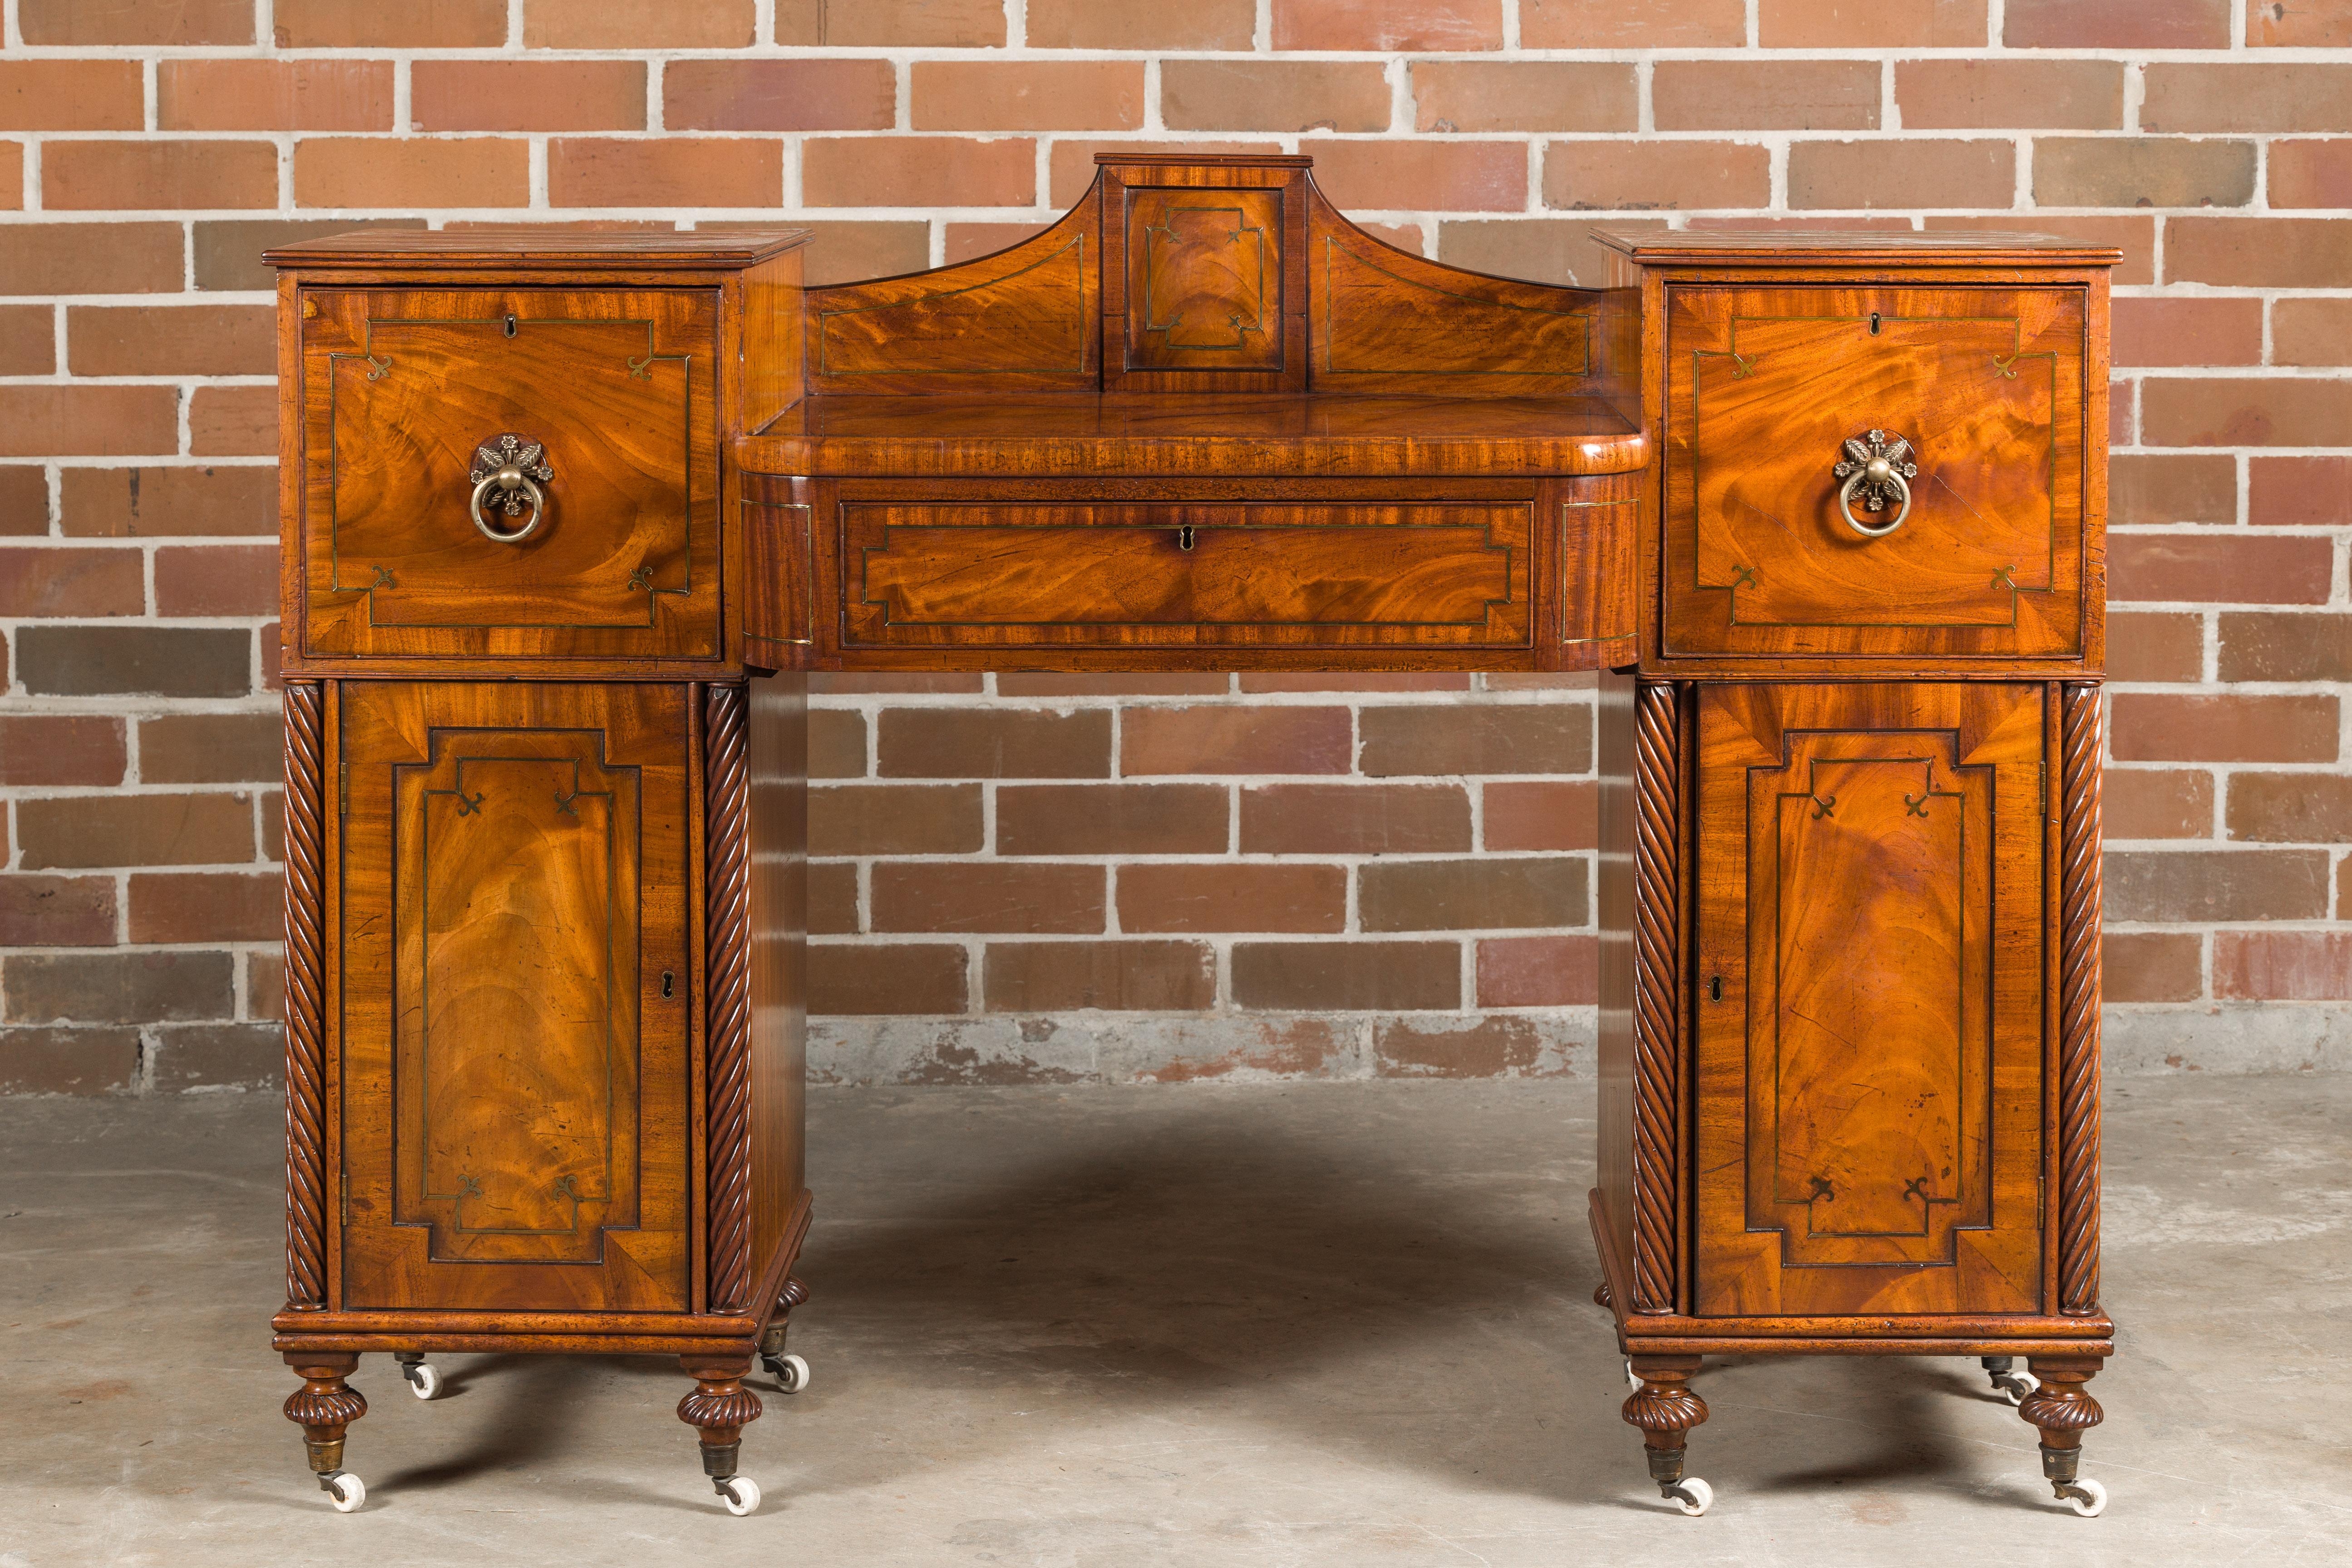 An English Regency period mahogany dressing table from the early 19th century with three drawers, two doors, brass inlay and twisted columns. Emanating an air of early 19th-century elegance, this English Regency mahogany dressing table is a timeless